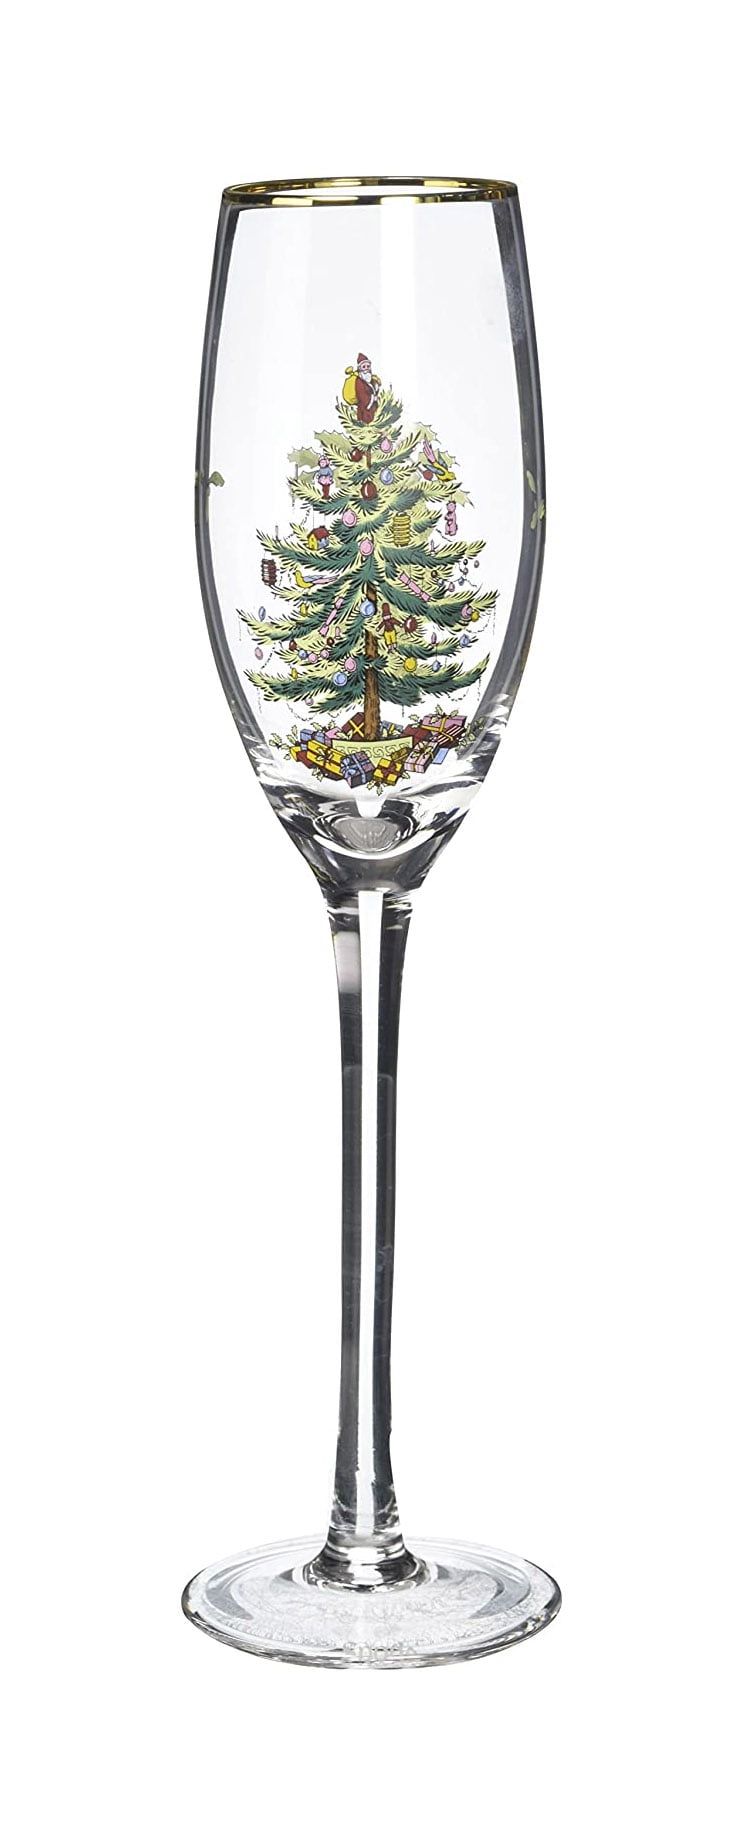 Set of 4 Spode Christmas Tree Champagne Flutes 